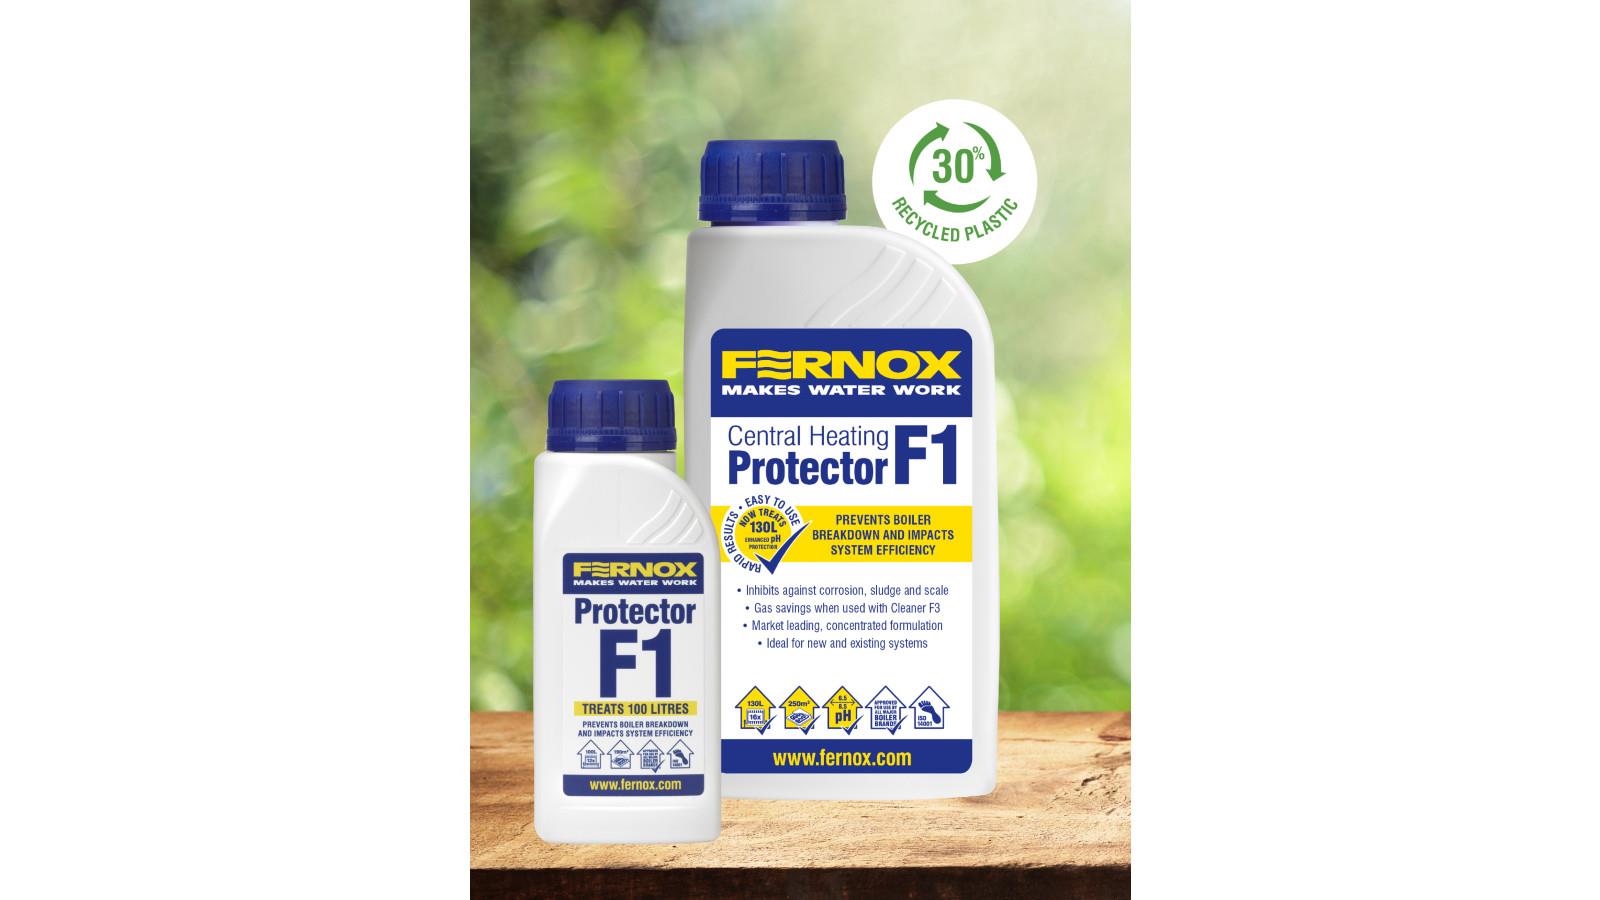 Fernox announces drive to more sustainable packaging image